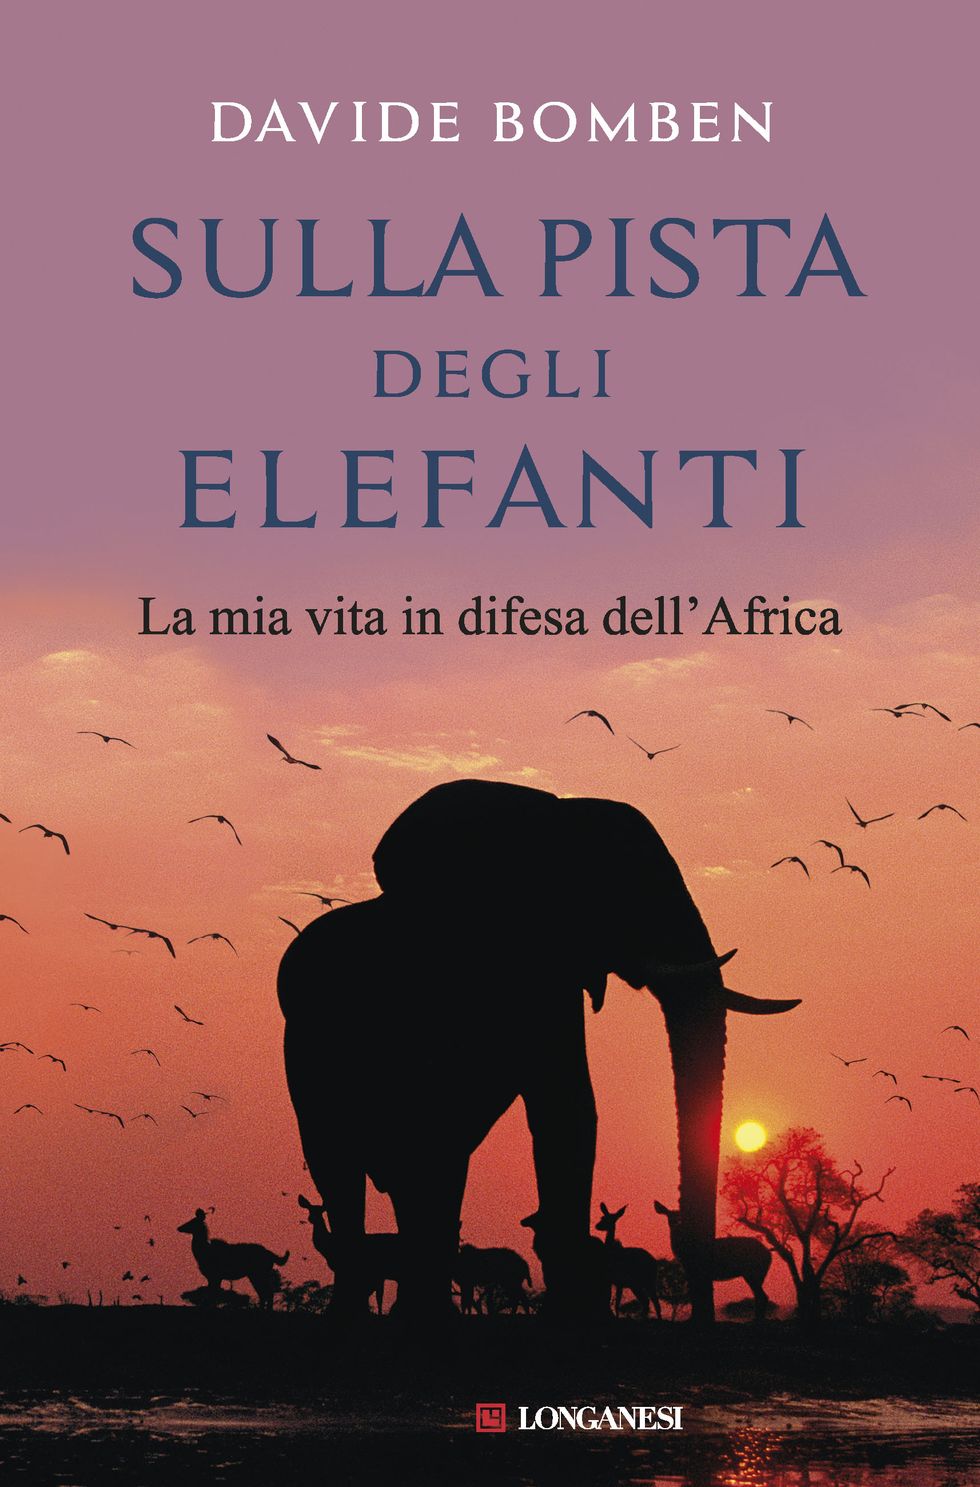 Elephant, Text, Sky, Book cover, Elephants and Mammoths, Adaptation, Font, Poster, Morning, Fiction, 